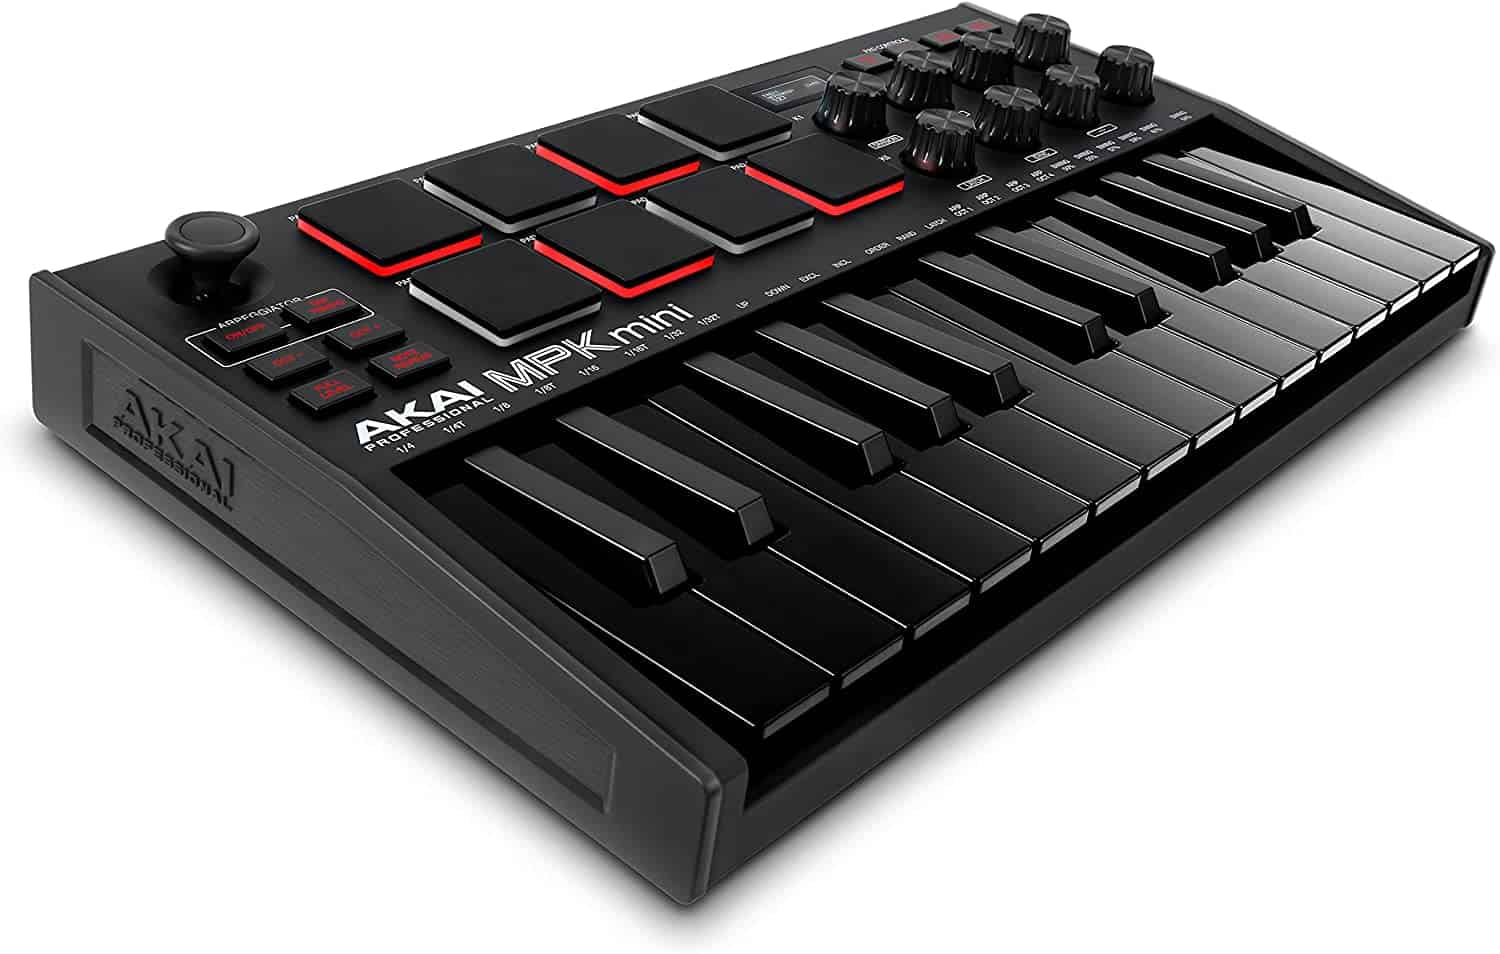 AKAI Professional MPK Mini MK3 - 25 Key USB MIDI Keyboard Controller With 8 Backlit Drum Pads, 8 Knobs and Music Production Software included (Black)